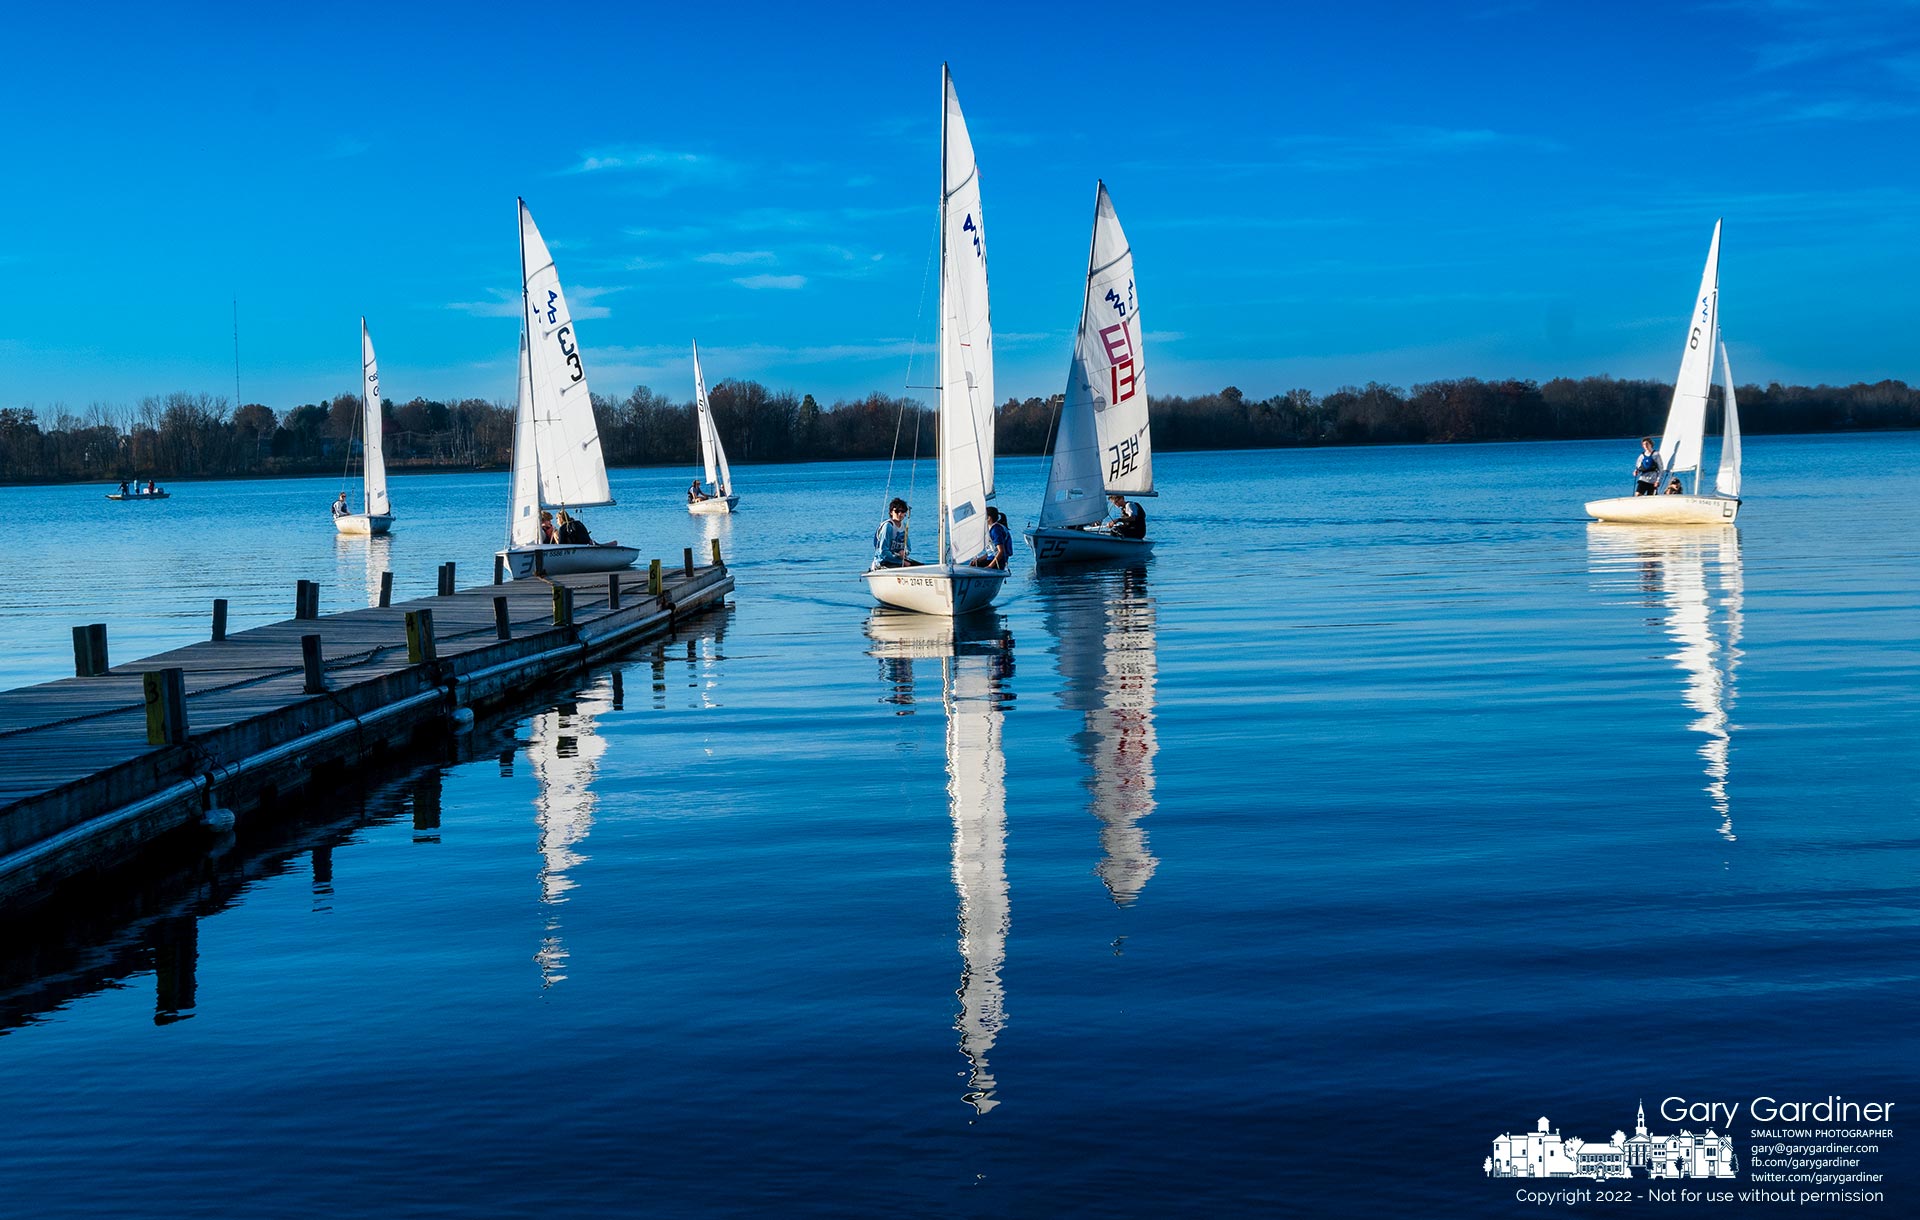 Sailors return to the dock at Hoover Sail Club following an afternoon enjoying calm waters, light winds, and friendly competition on Hoover Reservoir Thursday. My Final Photo for Nov. 3, 2022.